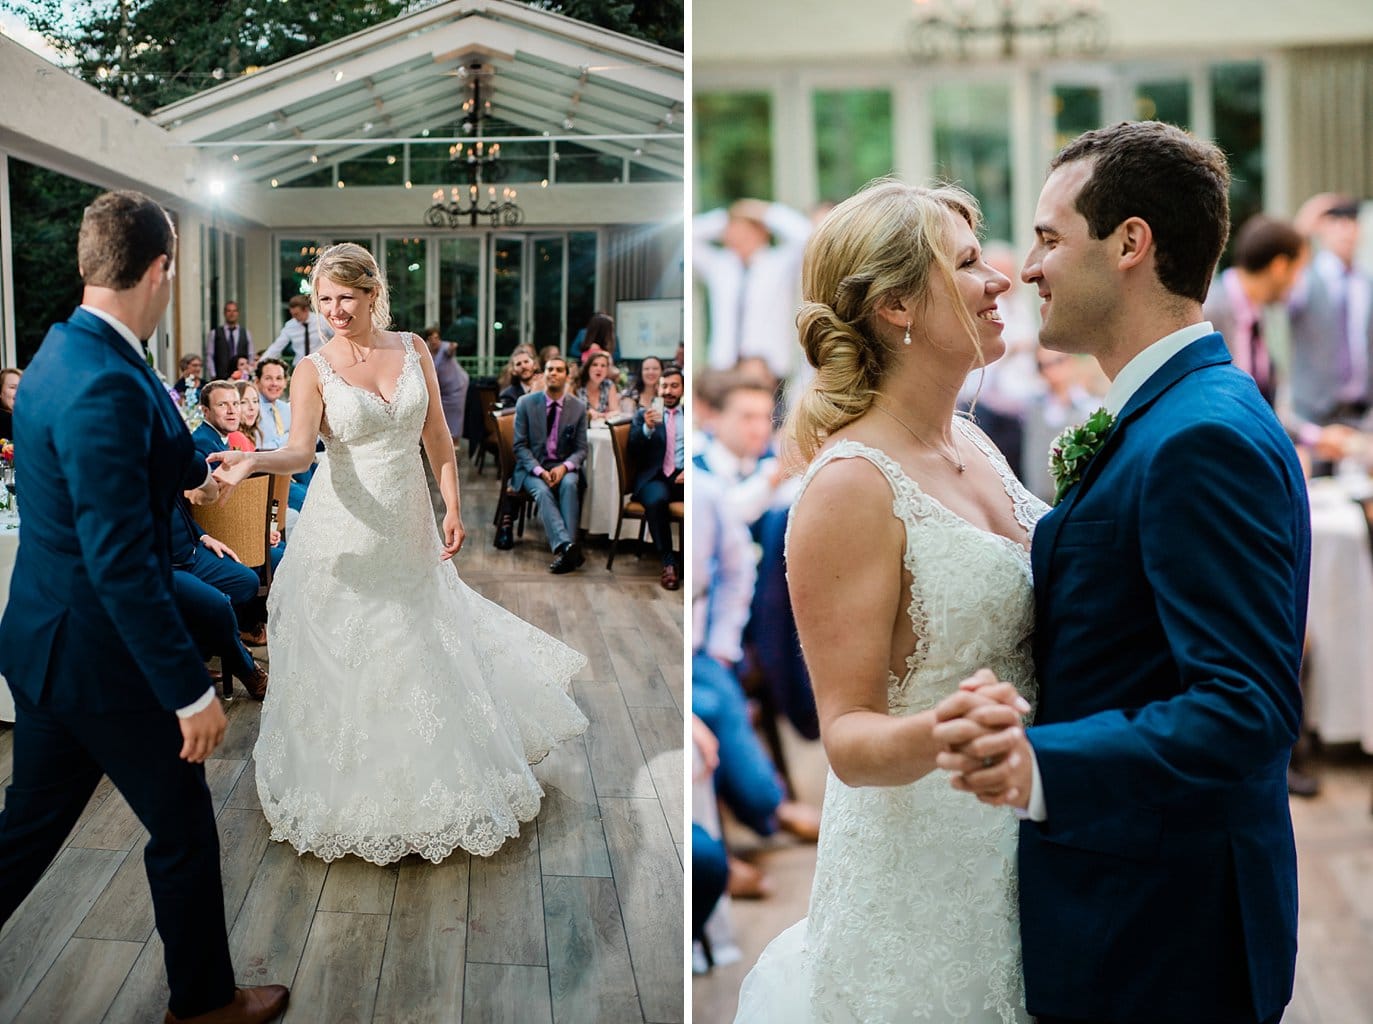 first dance indoor/ outdoor reception at Summer Sonnenalp Hotel Vail wedding by Copper Mountain wedding photographer Jennie Crate